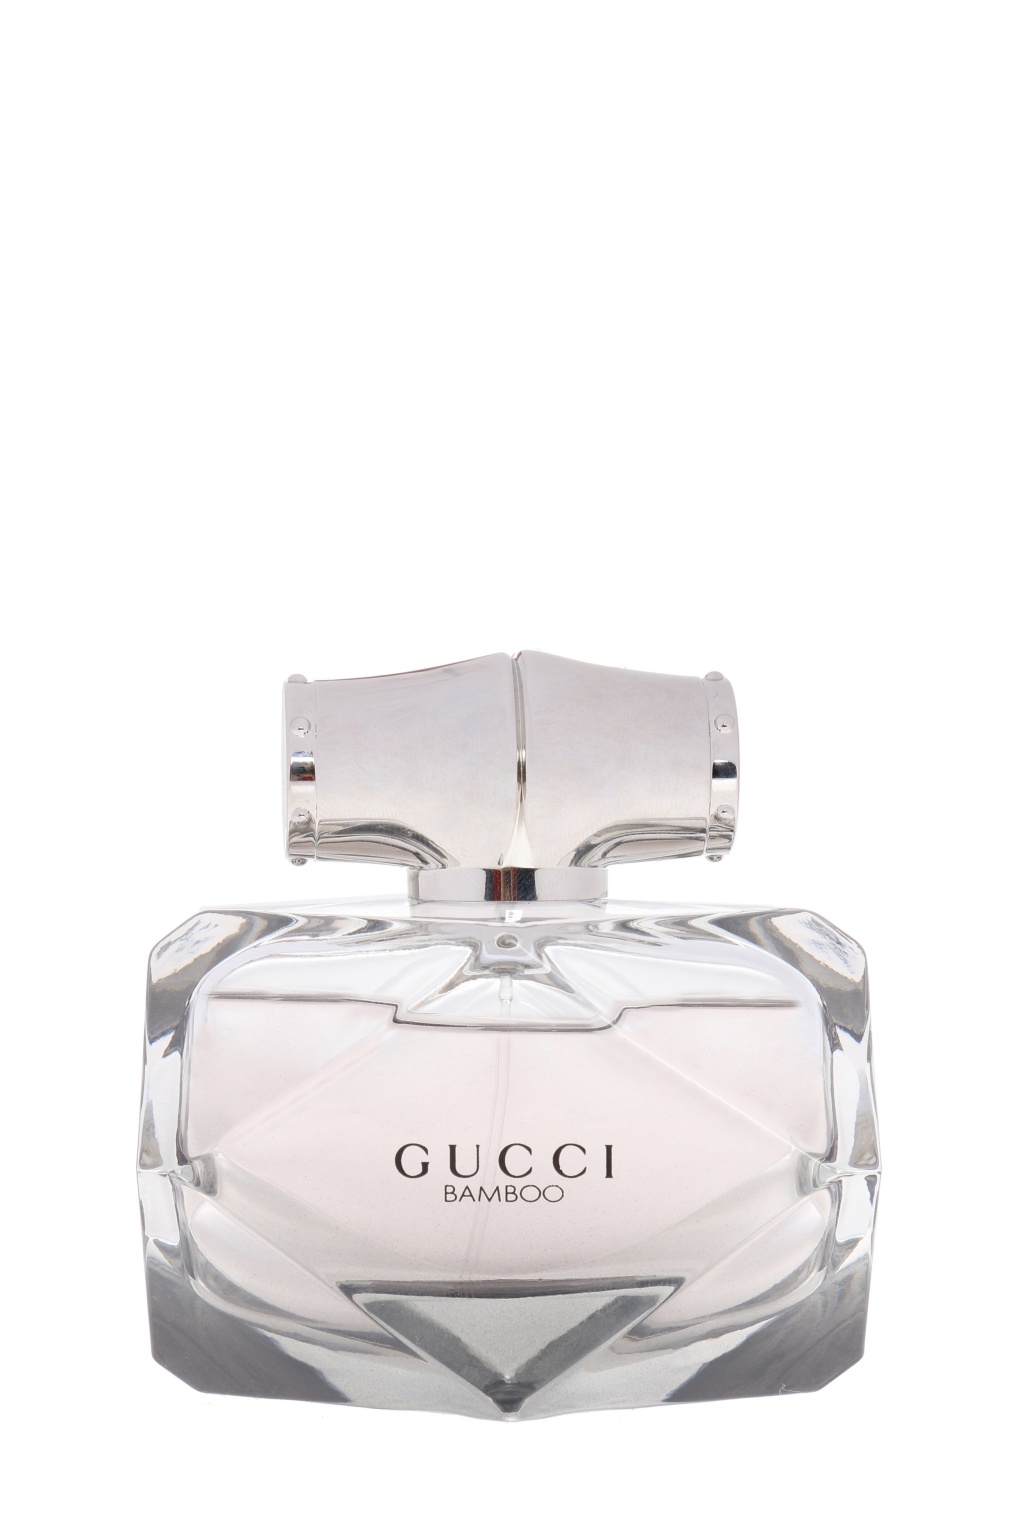 gucci bamboo floral